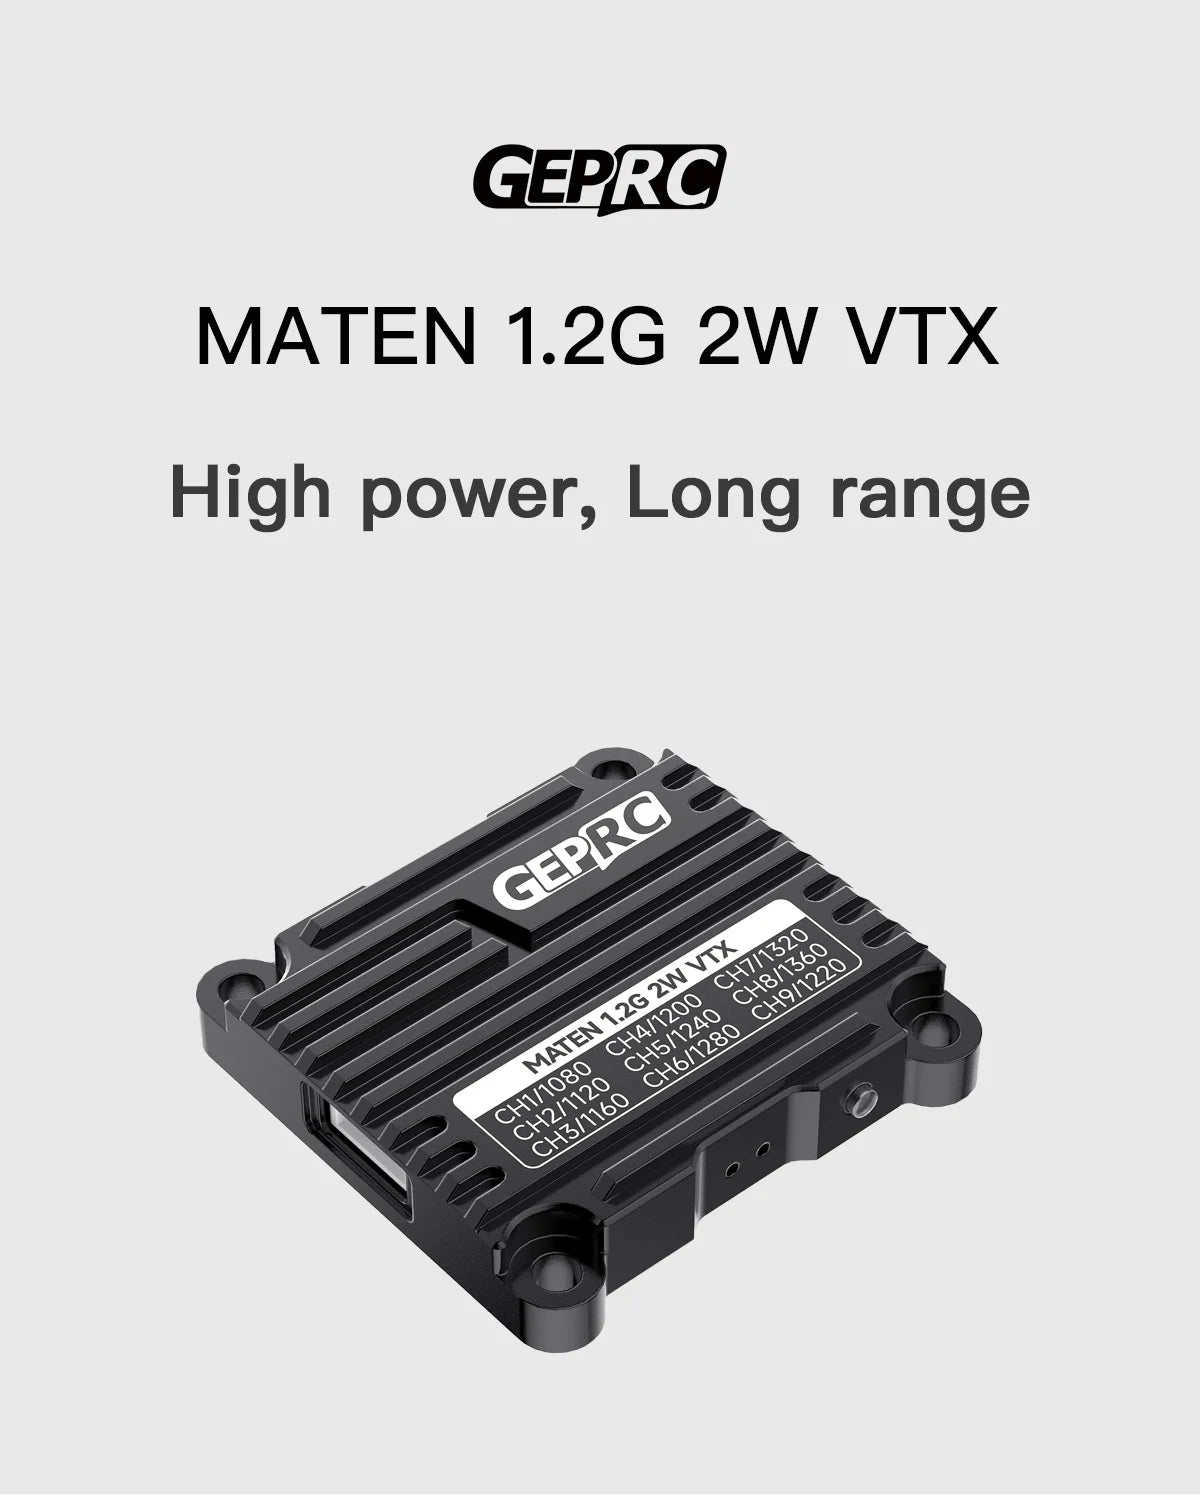 GEPRC MATEN 1.2G 2W VTX, it supports the IRC Tramp protocol and can use the OSD to quickly adjust parameters